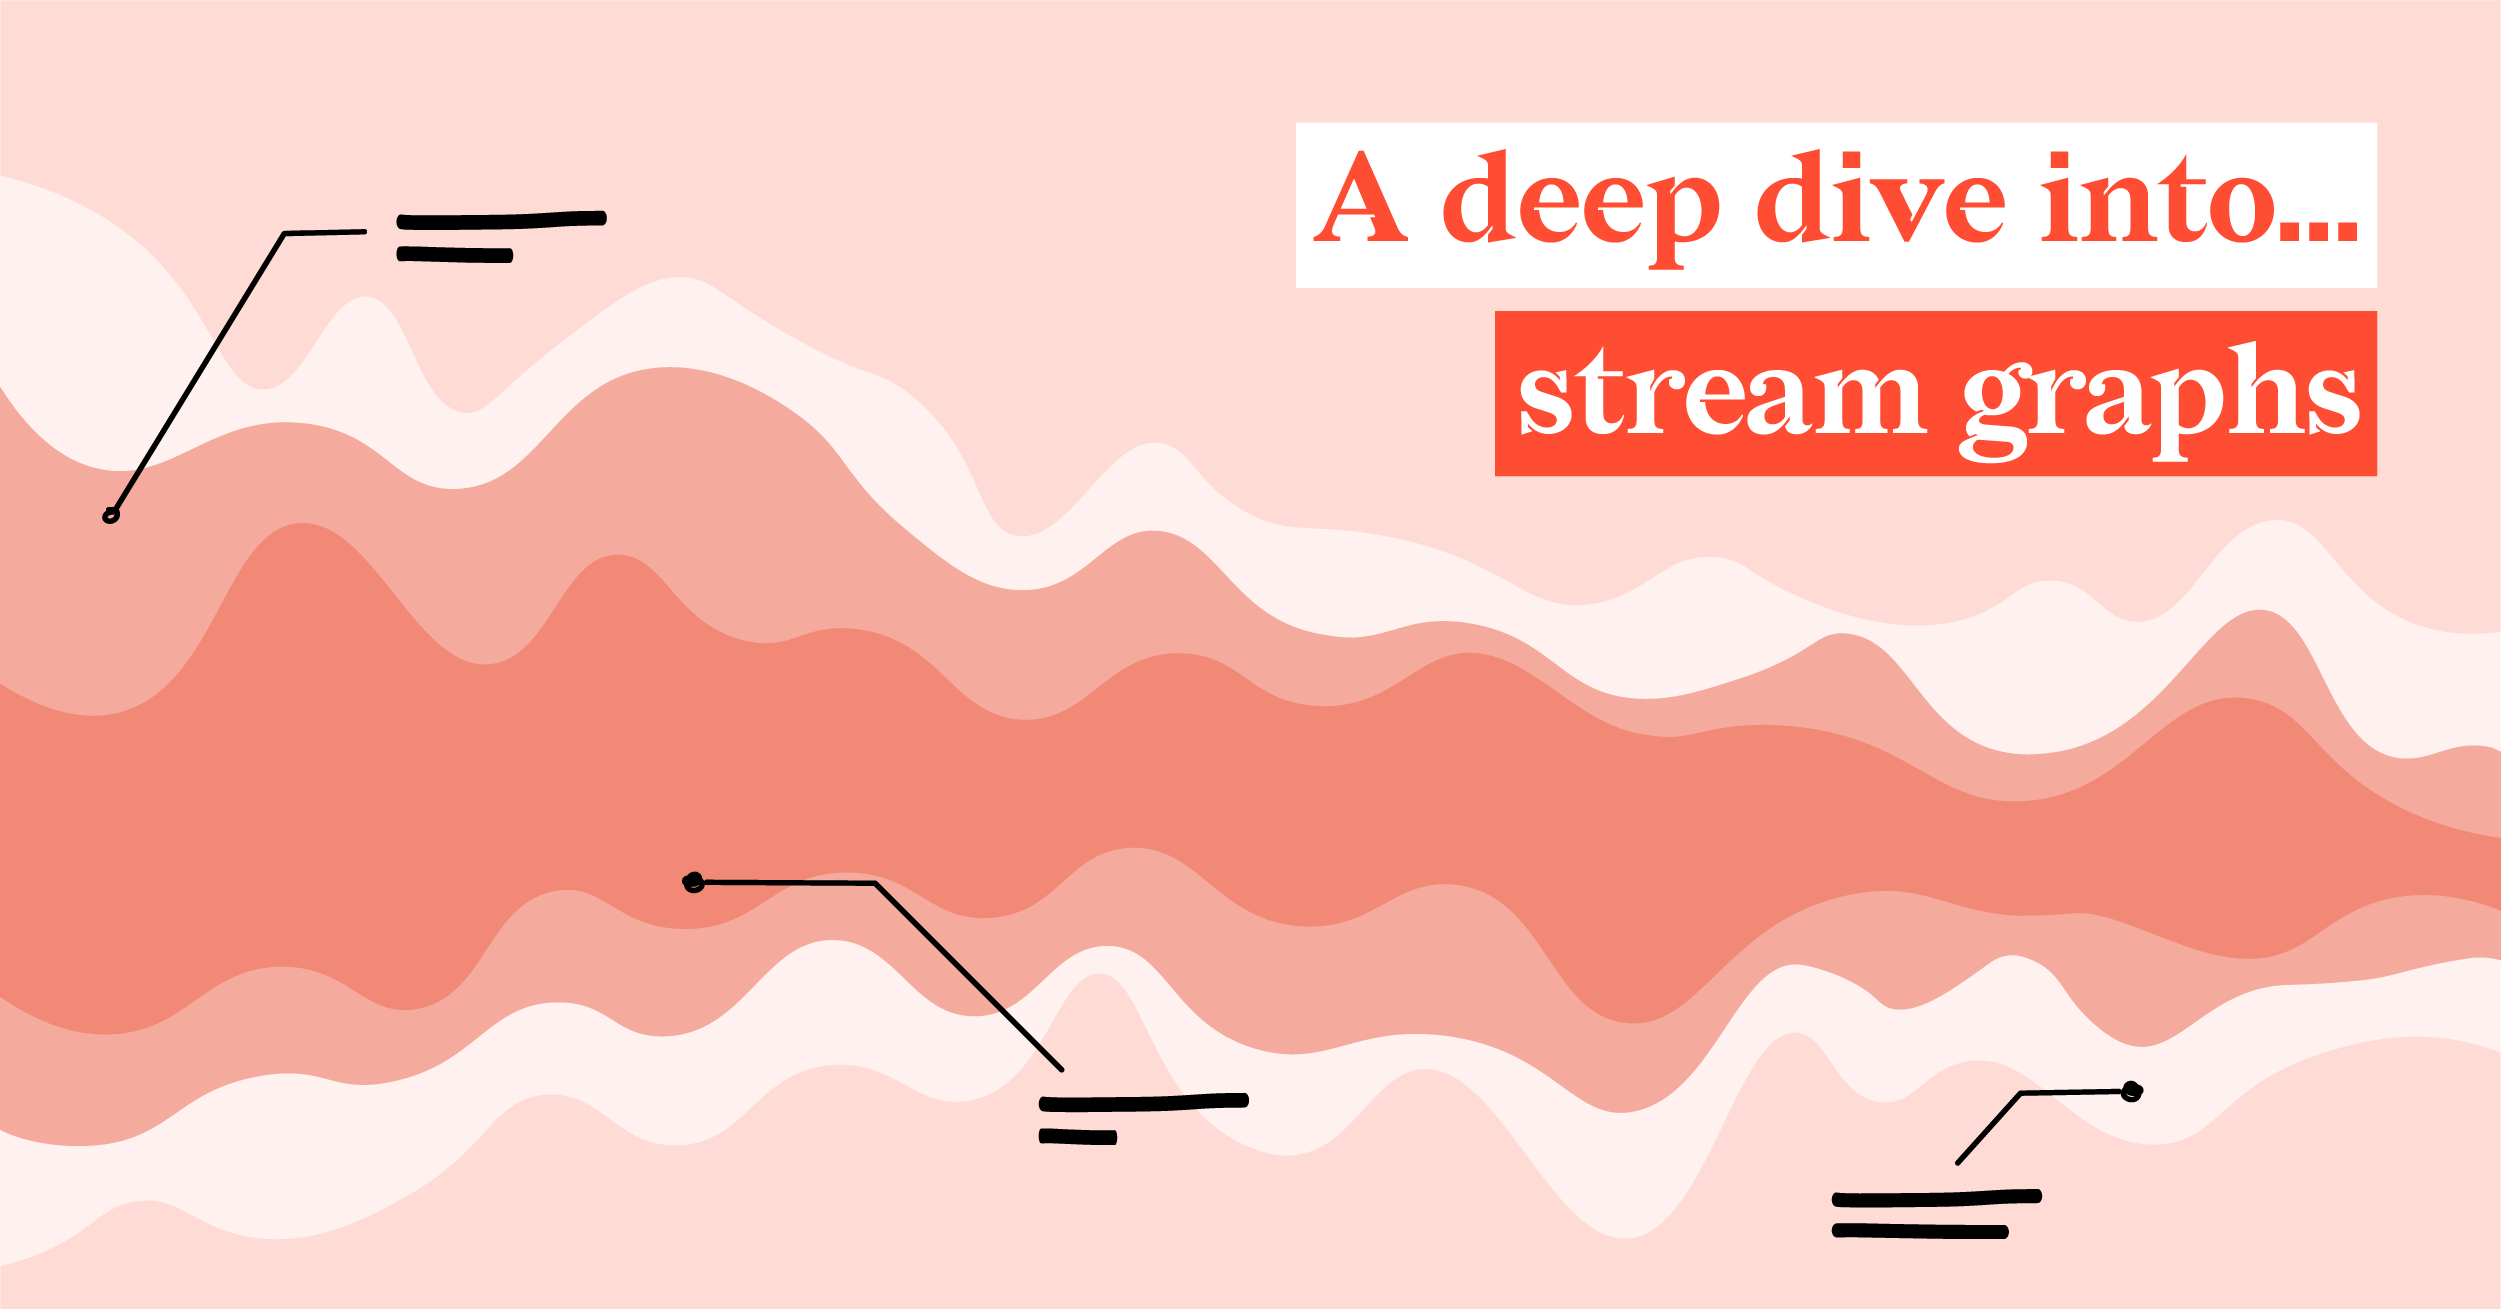 The featured image of this blog article shows a pale red background and a conceptualized example of a stream graph. The text reads "A deep dive into... stream graphs" which is the title of the article.